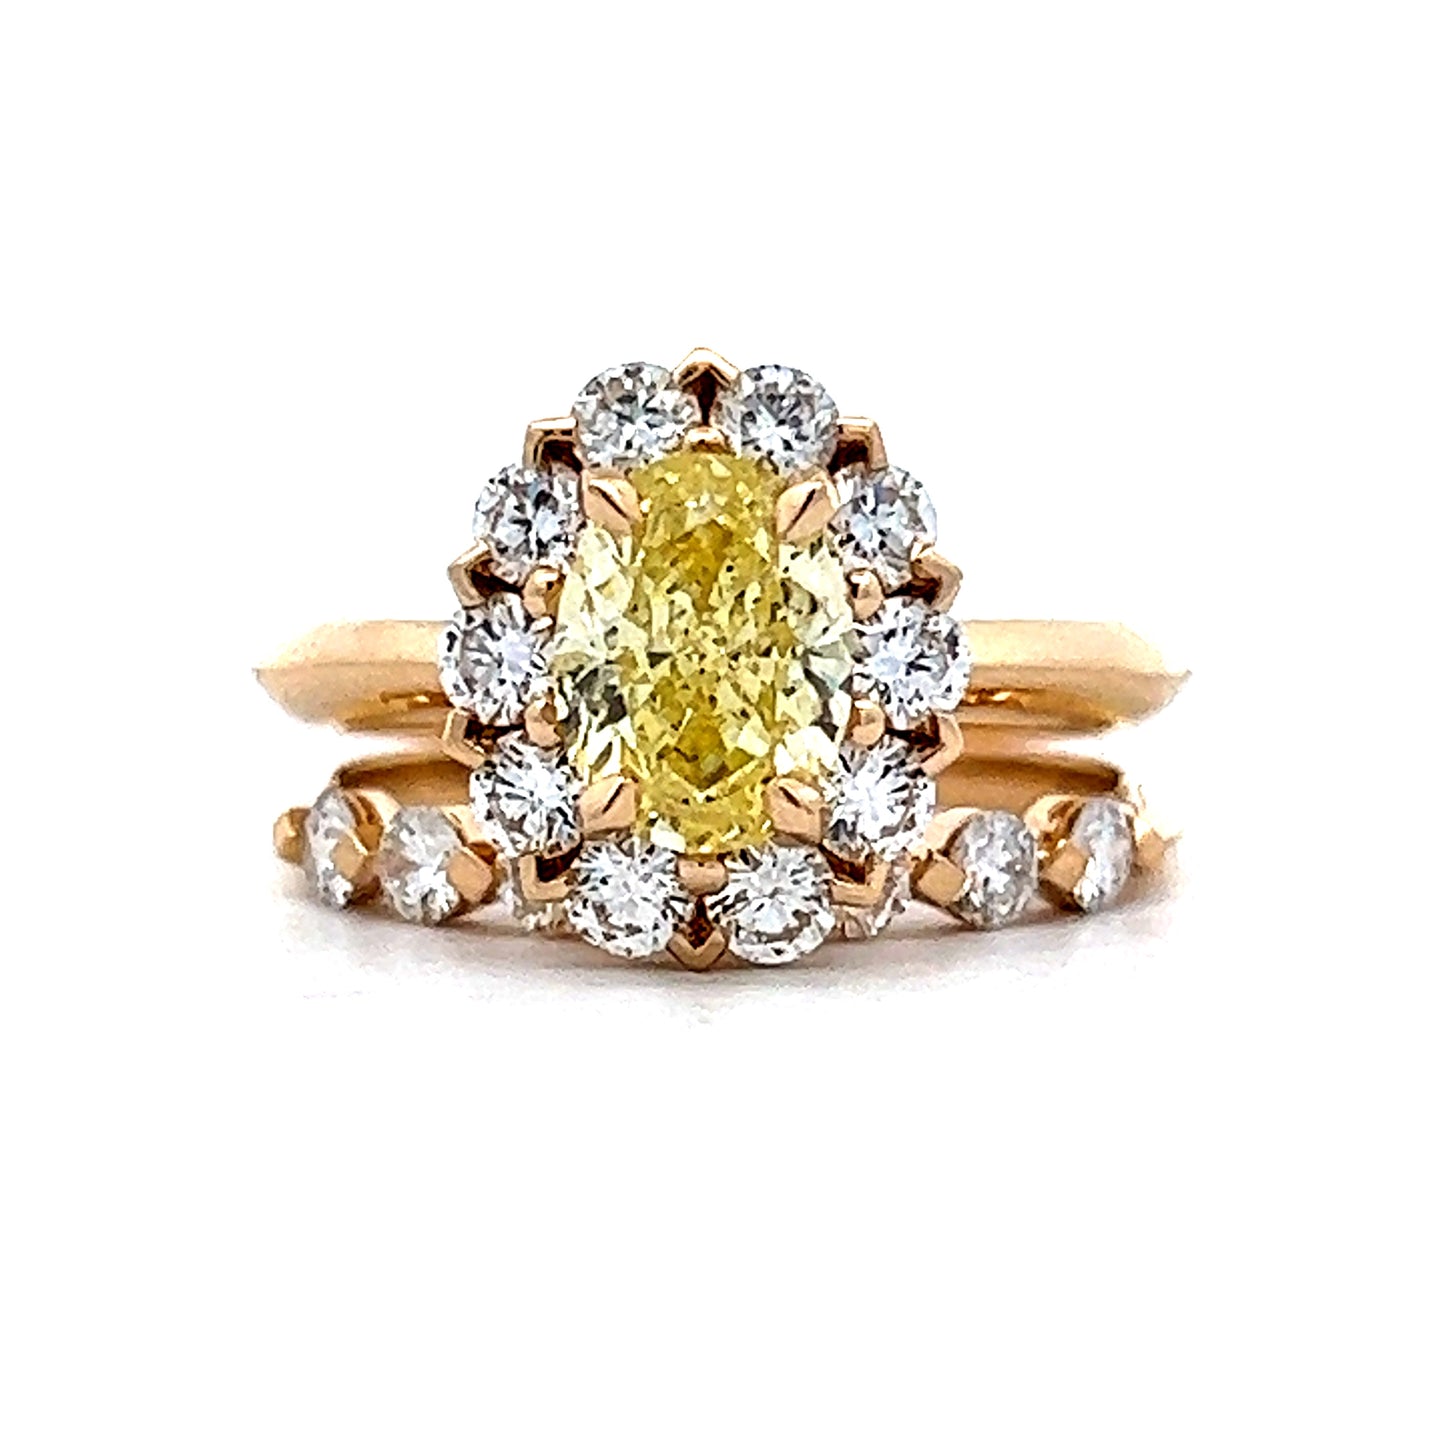 1.39 Fancy Yellow Diamond Engagement Ring in 14k Yellow Gold